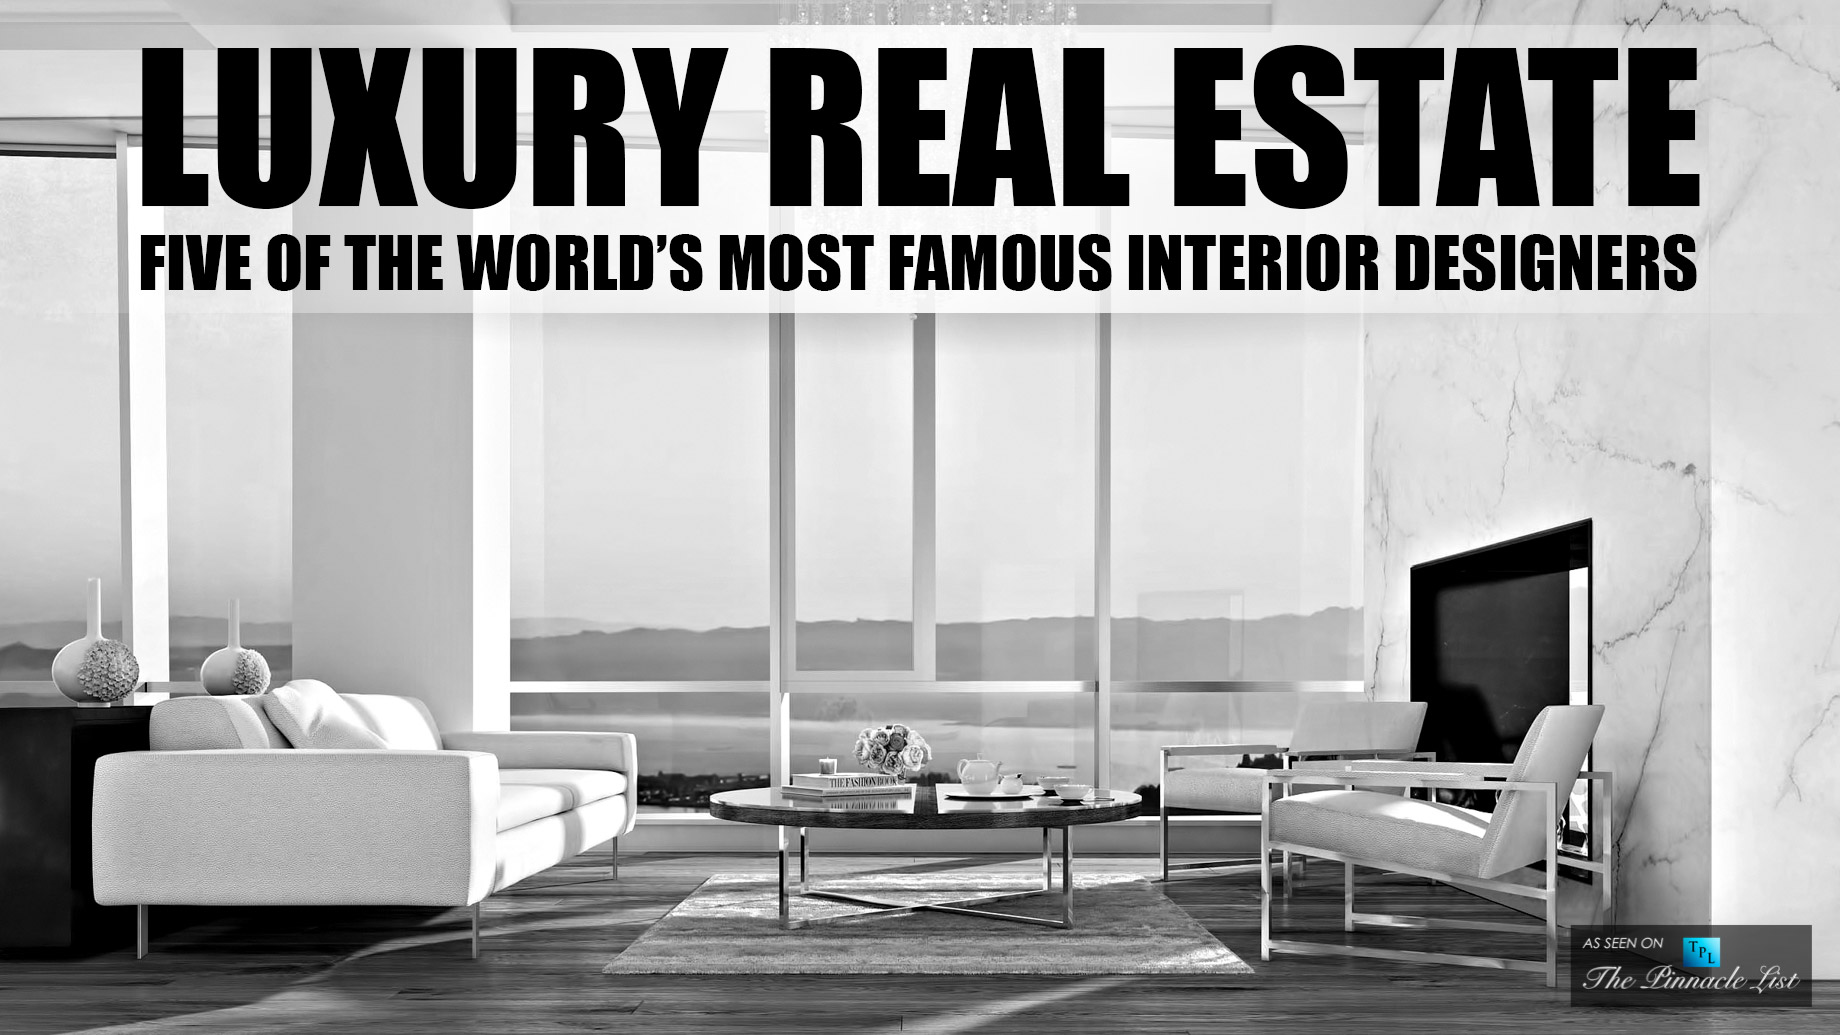 Luxury Real Estate - Five of The World’s Most Famous Interior Designers